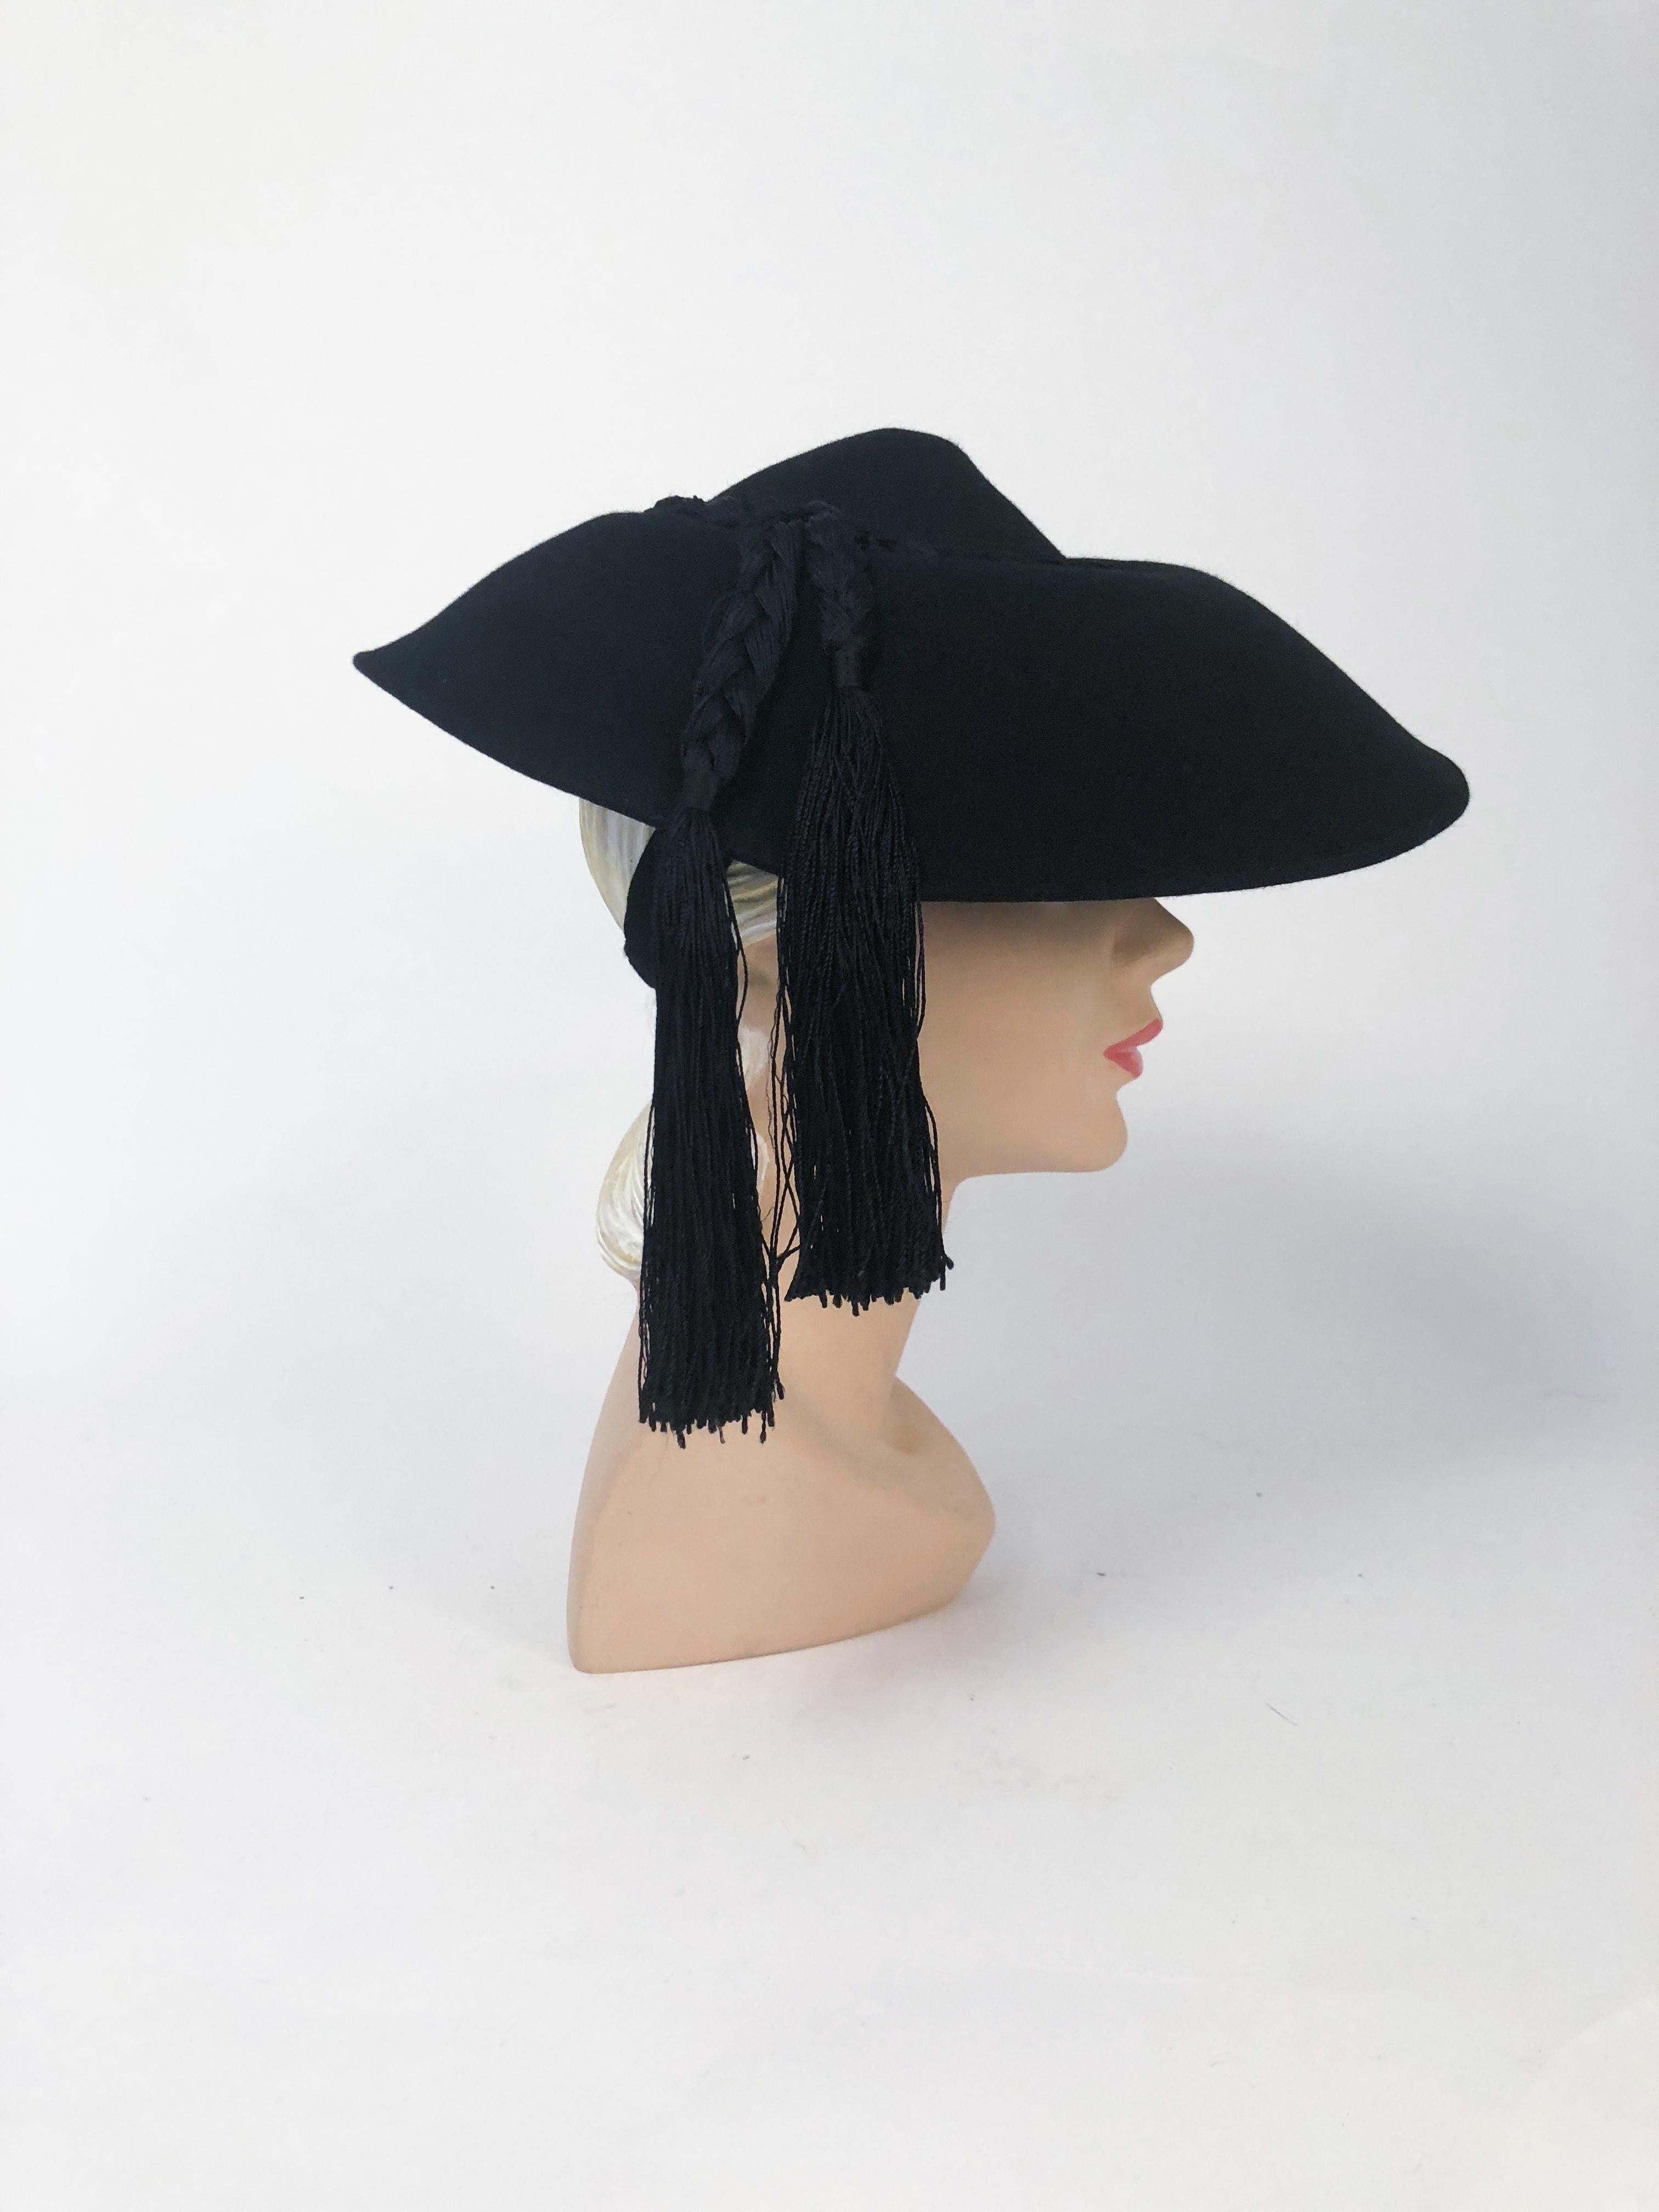 1940s Black Fur Felt Wide-Brimmed Hat With Silk Cord Tassels. Black Fur felt wide-brimmed hat with braided silk cord decorative band and tassels with felt keepers and structure. 